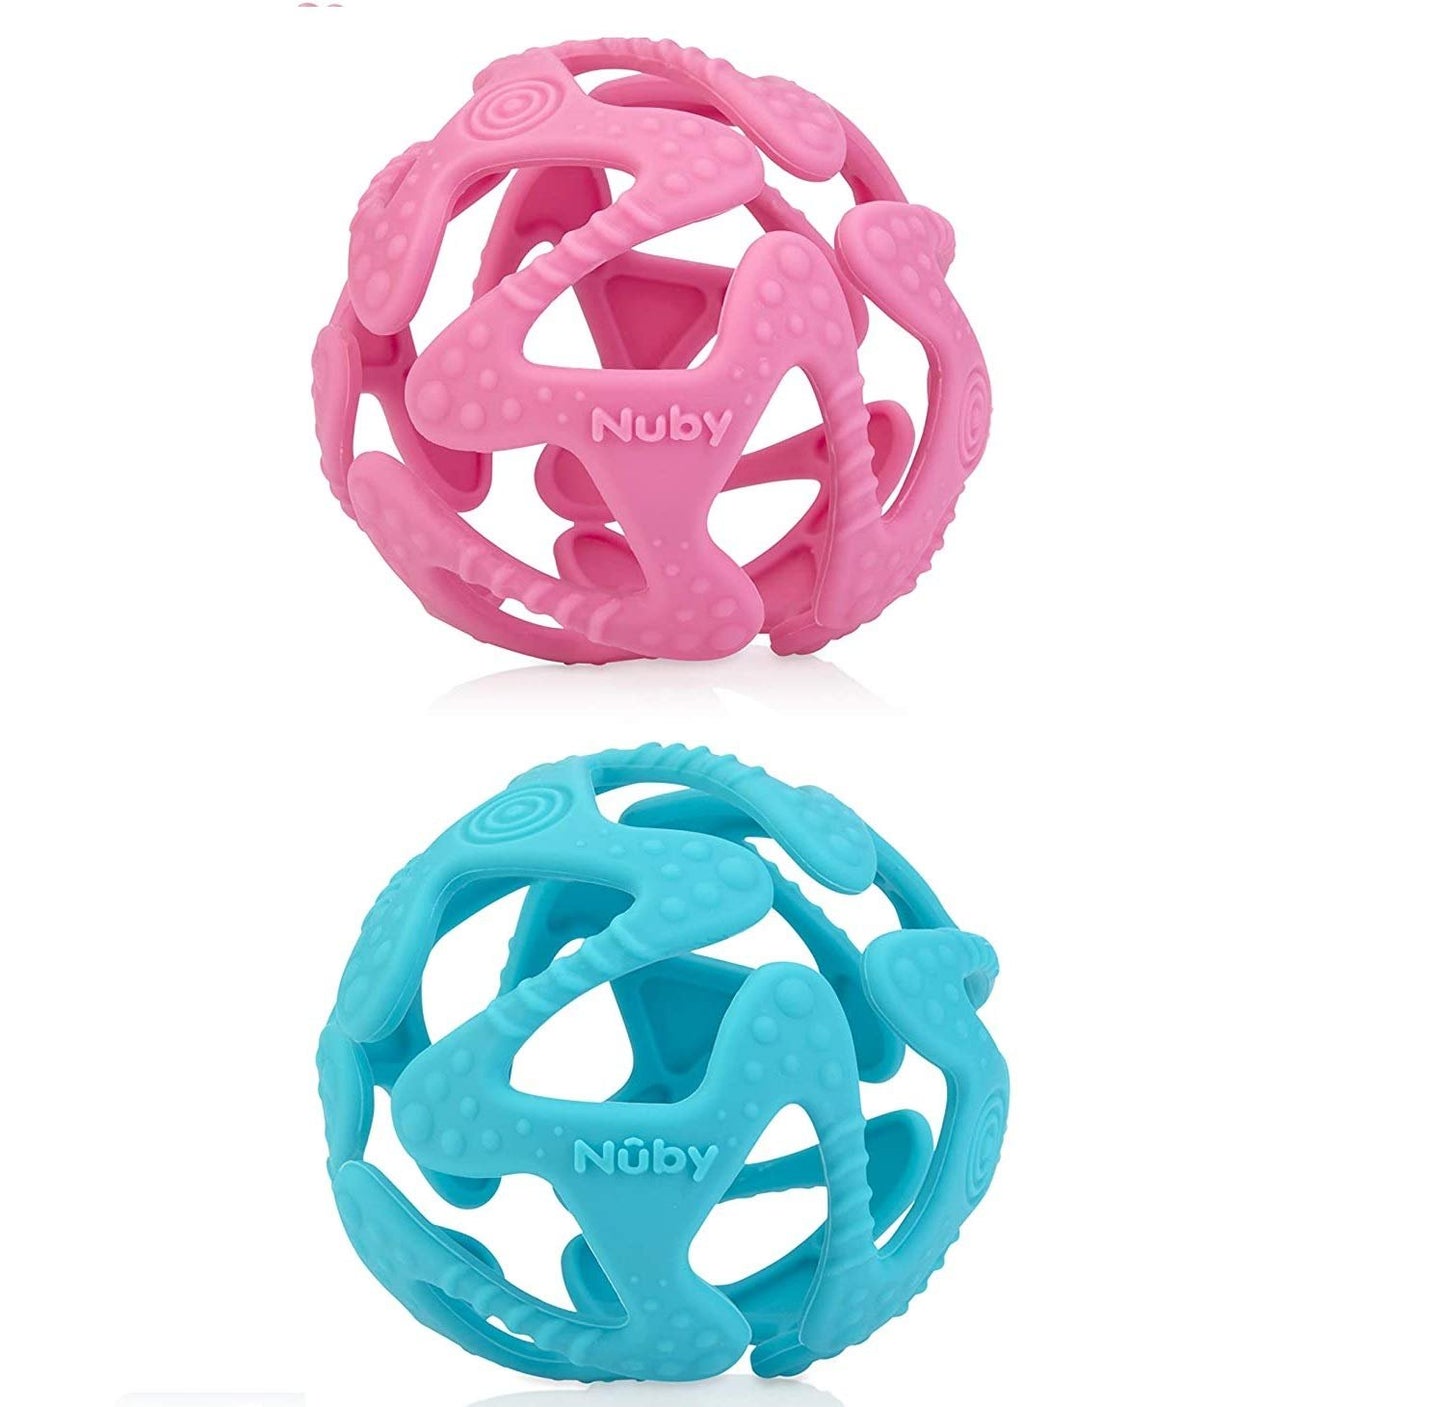 Nuby 100% Silicone Tuggy Teether Ball (Pink/Aqua) - 2 Pack